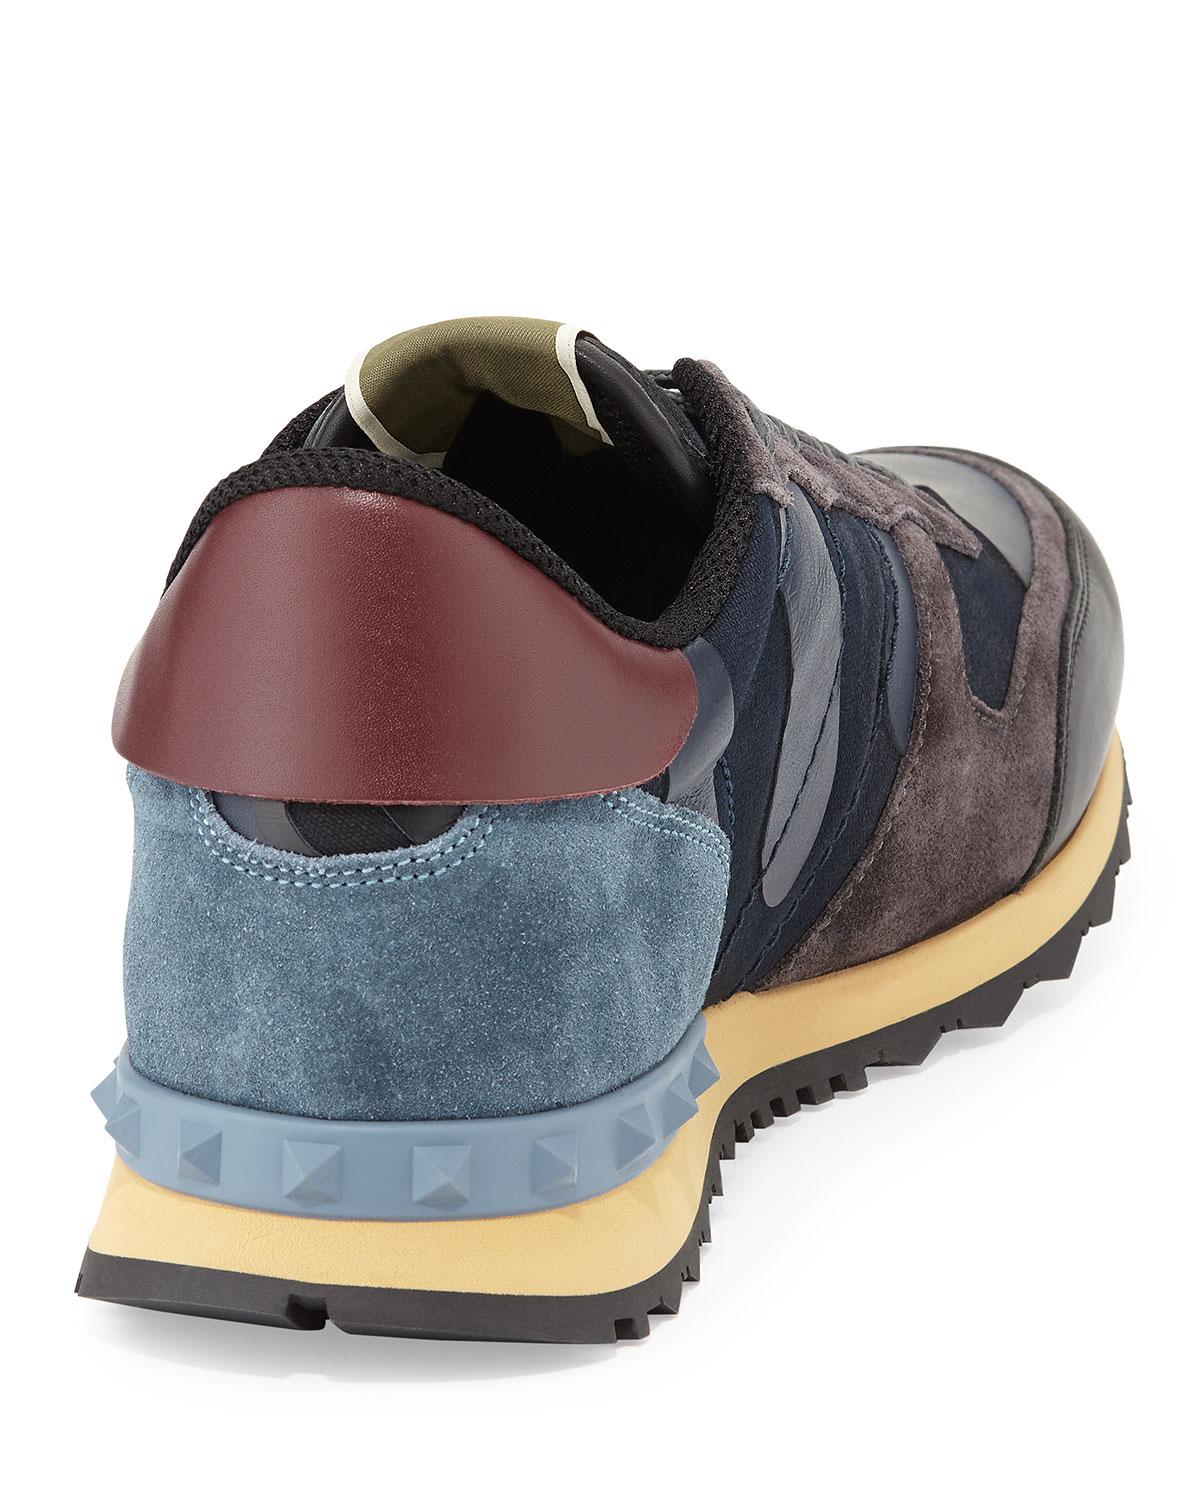 Valentino Sneakers Blue Camo Store, GET 56% OFF, ricettecuco.it